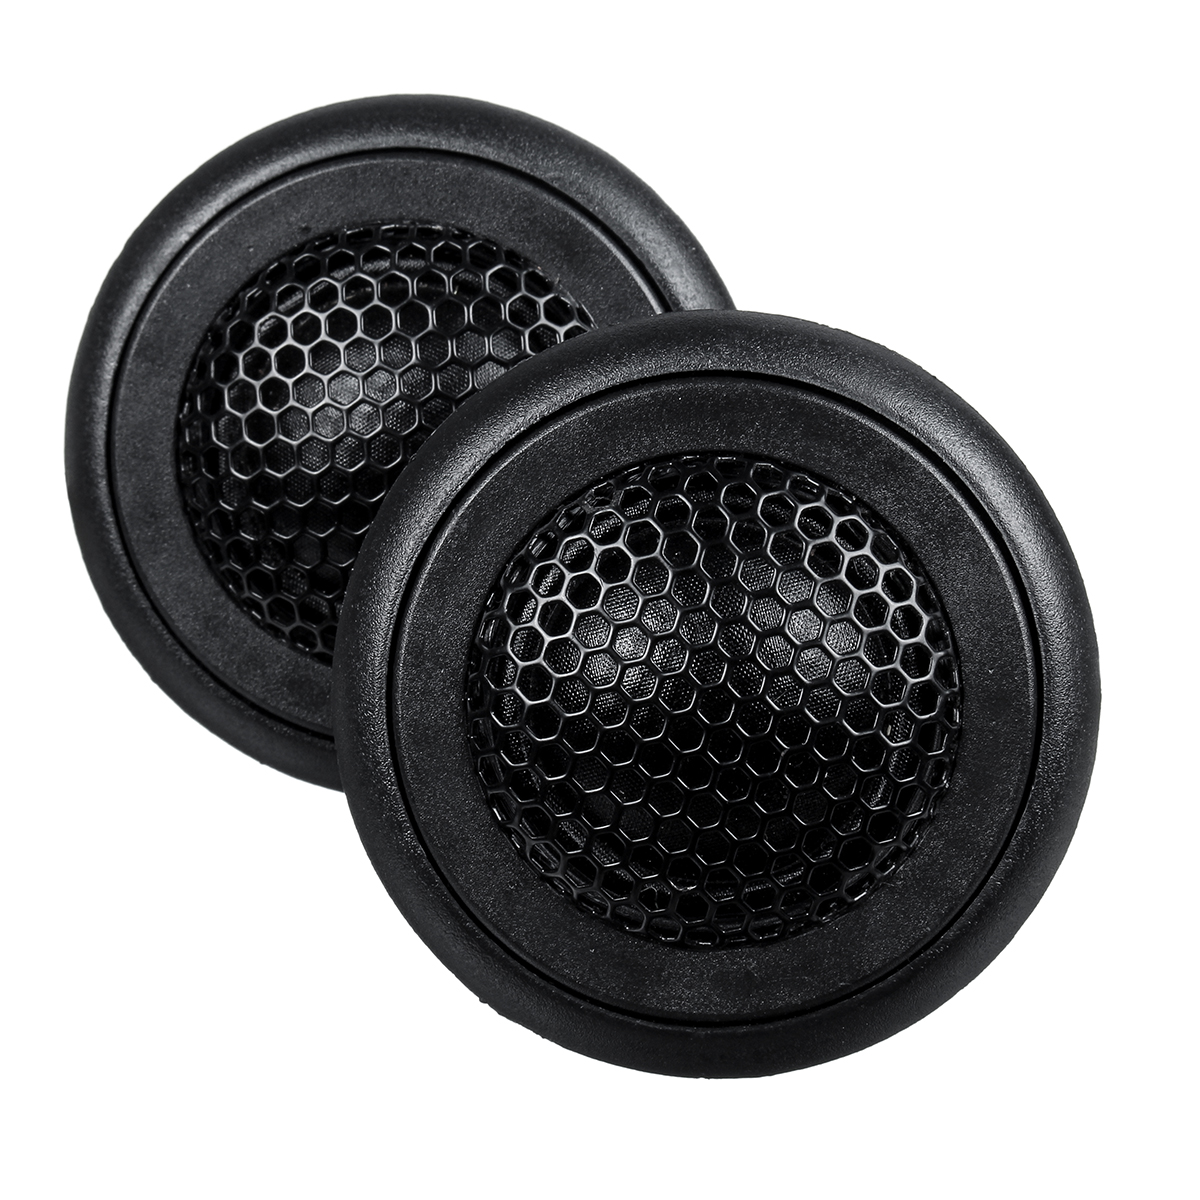 

Car Stereo Speaker Music Audio Soft Dome Balanced Lound Tweeters Horn 35W 150W 2PCS for 12V Vehicle